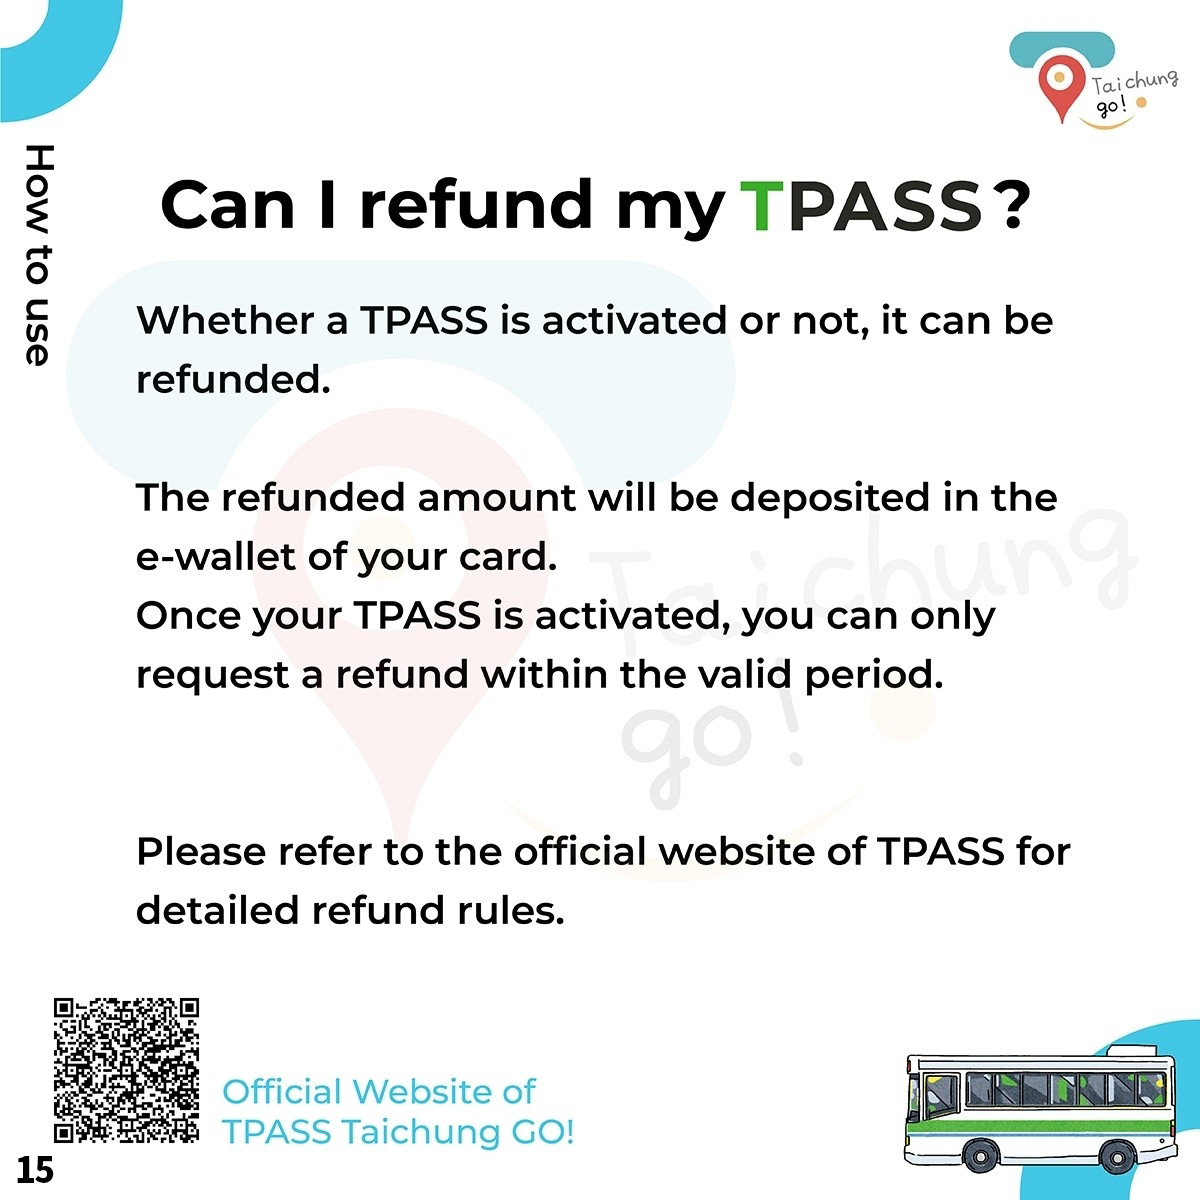 Whether a TPASS is activated or not,it can be refunded. The refunded amount will be deposited in the e-wallet of your card. Once your TPASS is activated,you can only request a refund within the valid period.